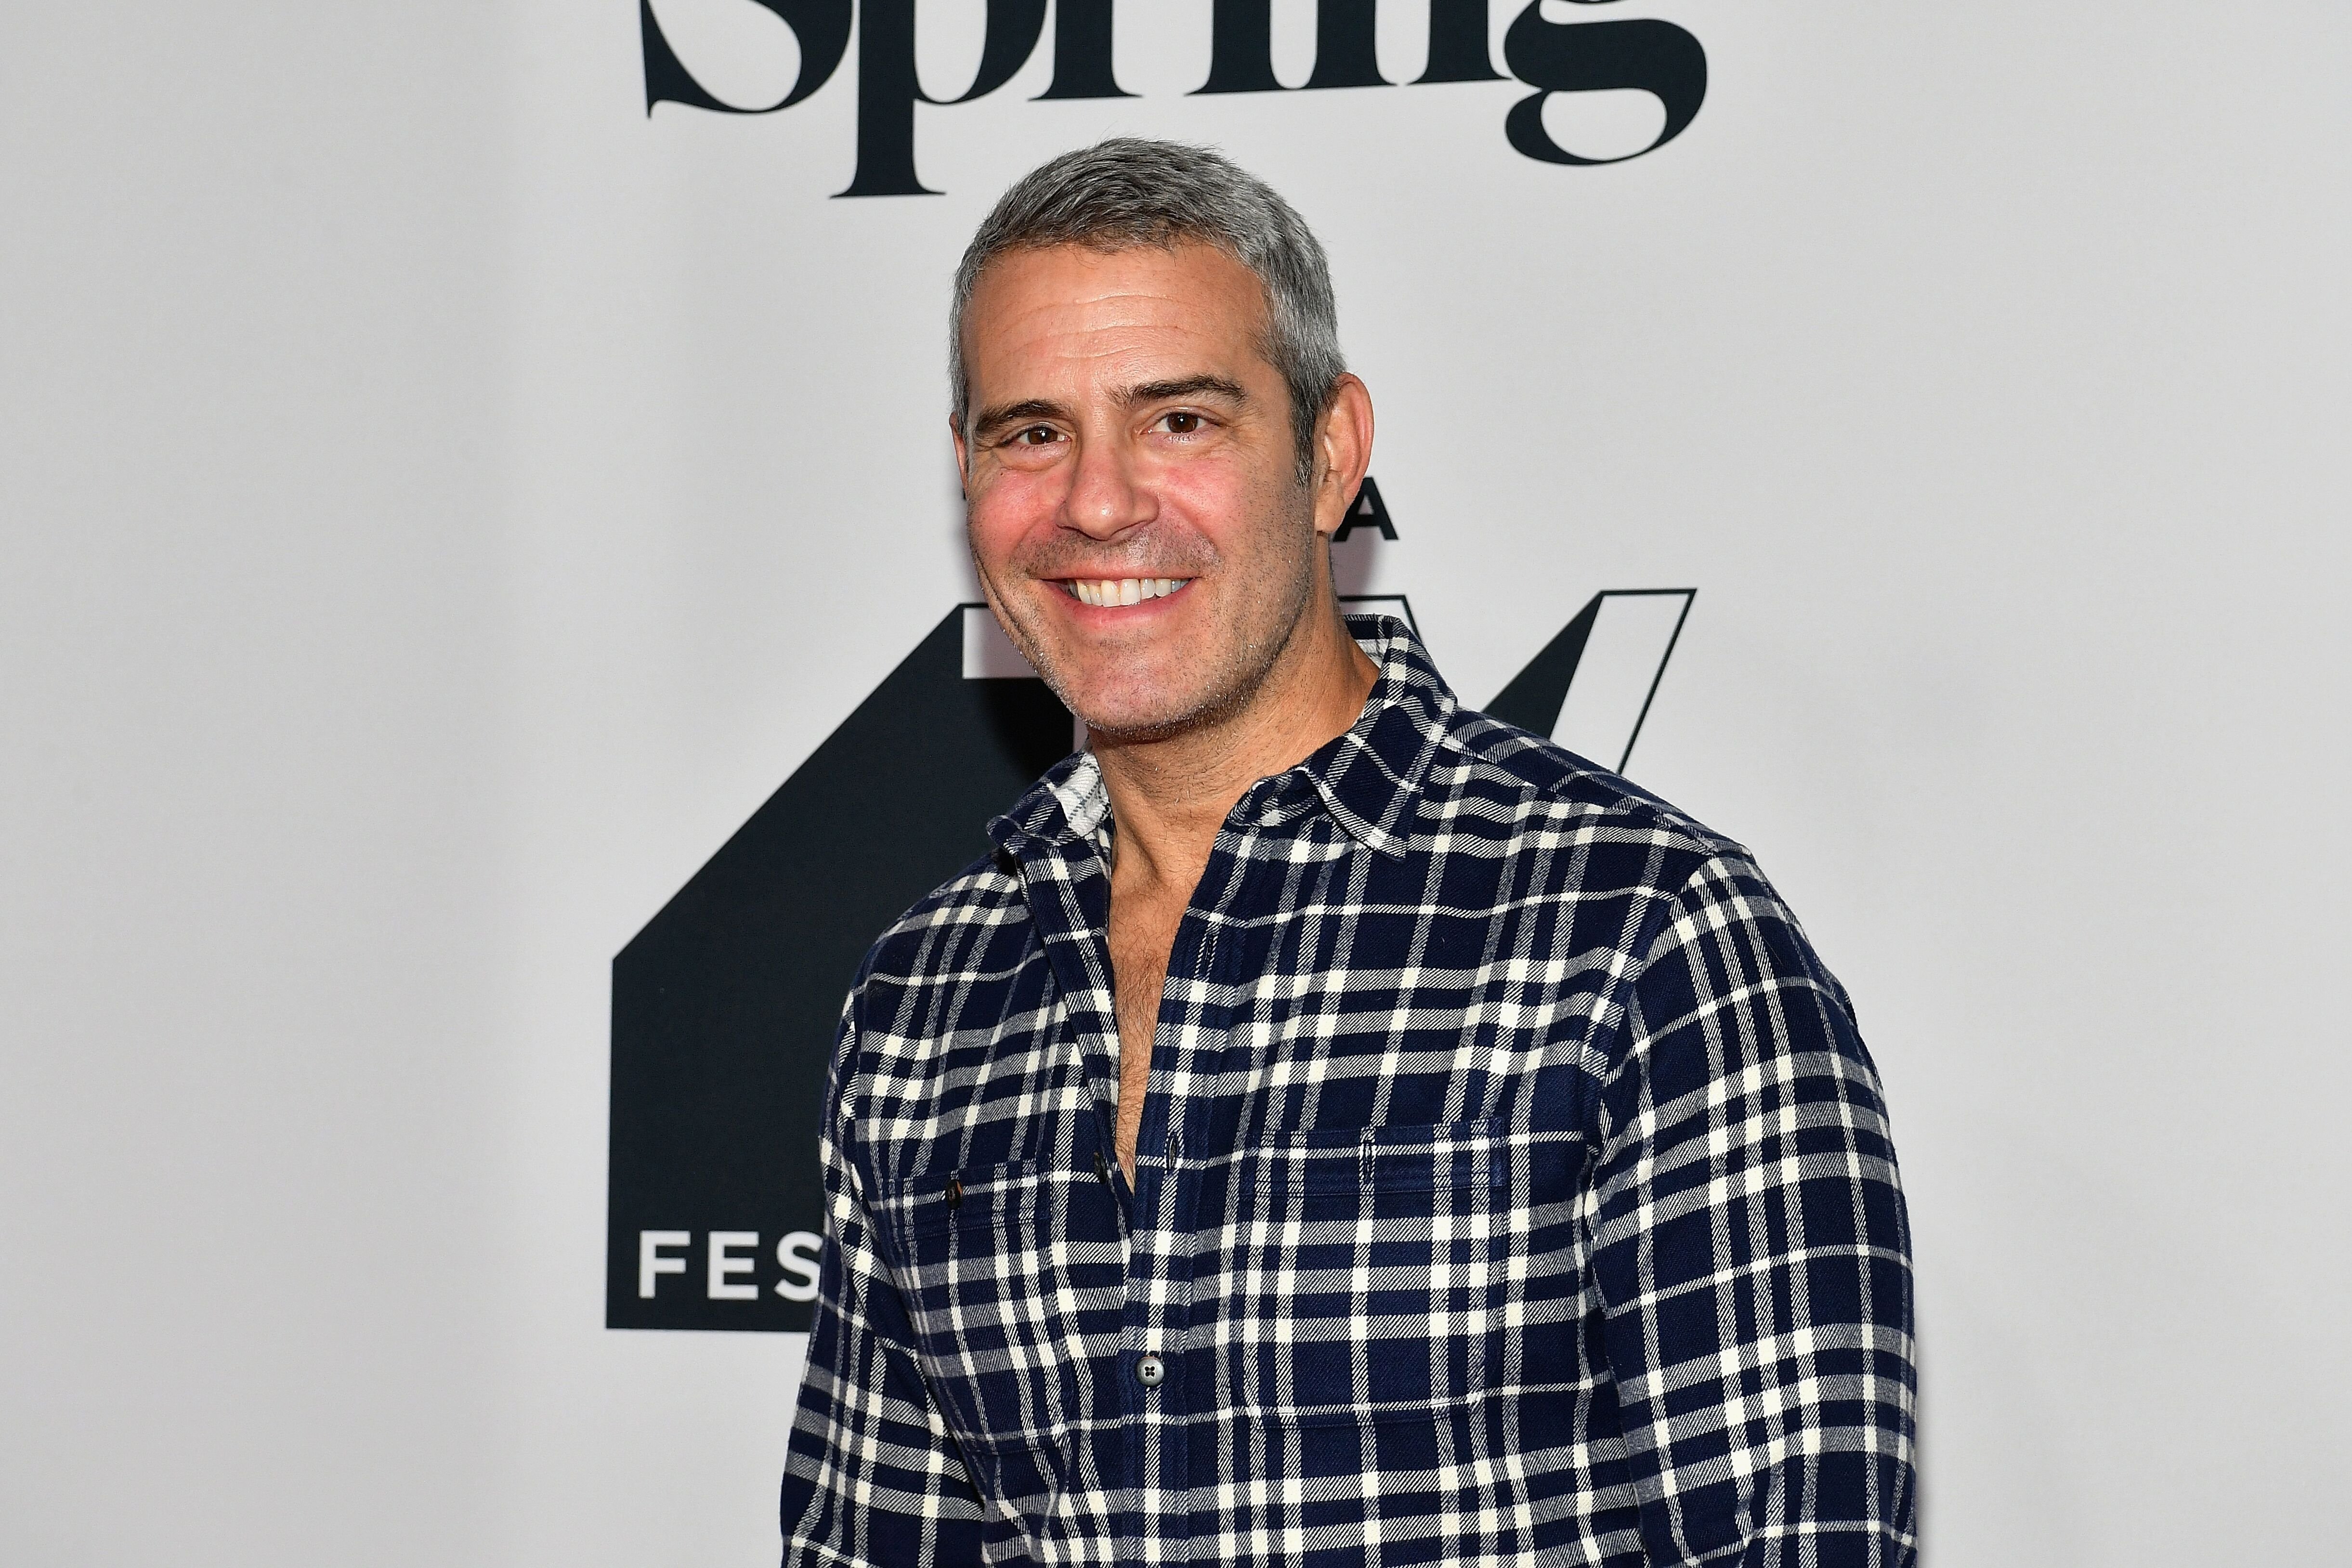 Andy Cohen attends the Tribeca talks panel during the 2018 Tribeca TV Festival at Spring Studios on September 23, 2018. | Photo: Getty Images